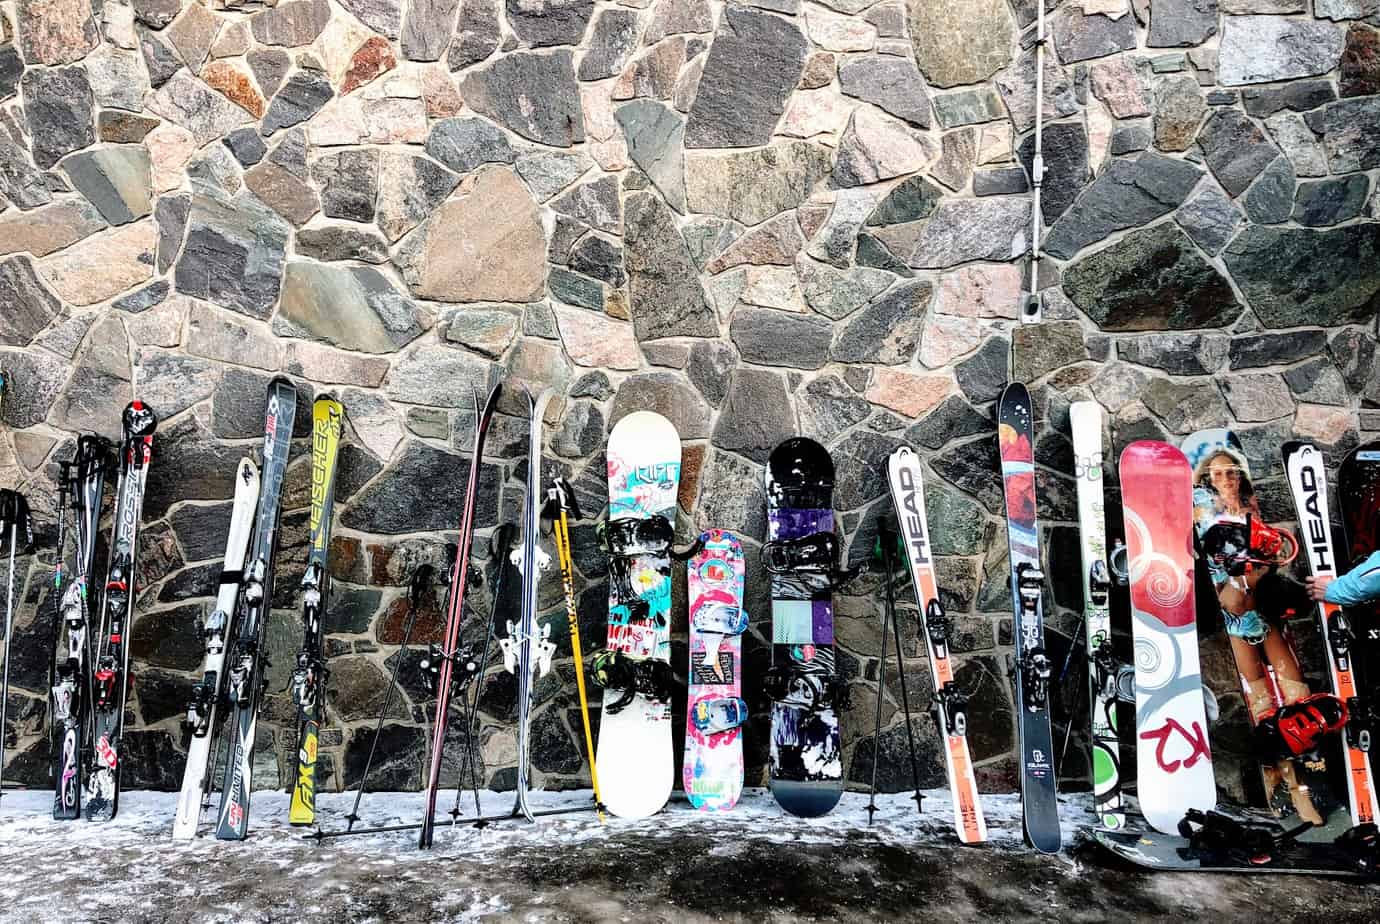 Family Weekend In Mount Snow, Vermont | Stroller In The City